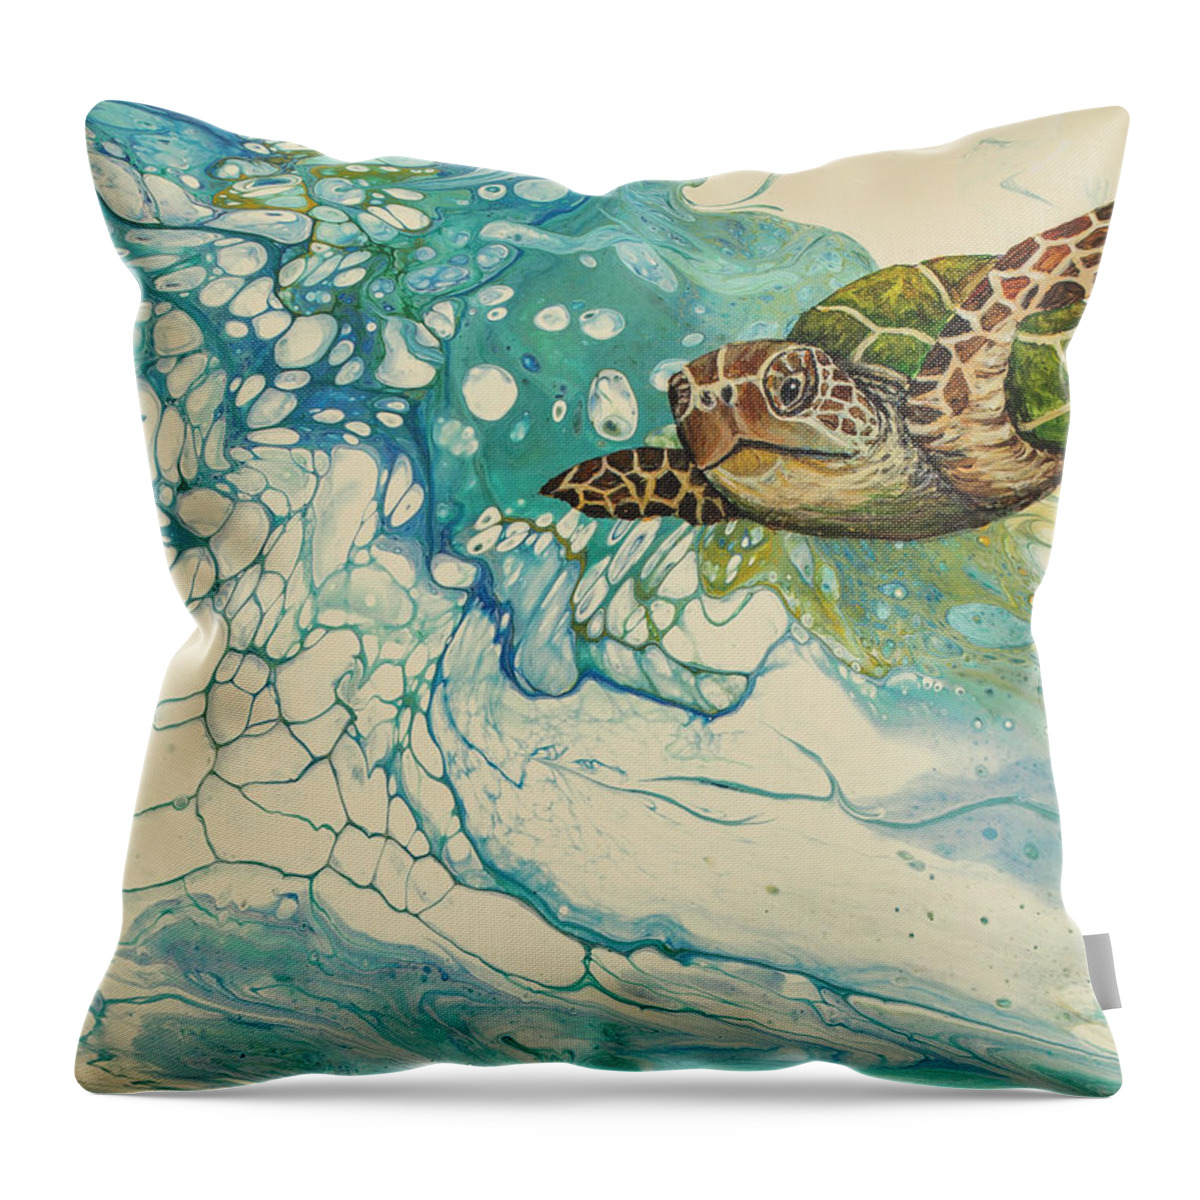 Honu Throw Pillow featuring the painting Ocean's Call by Darice Machel McGuire